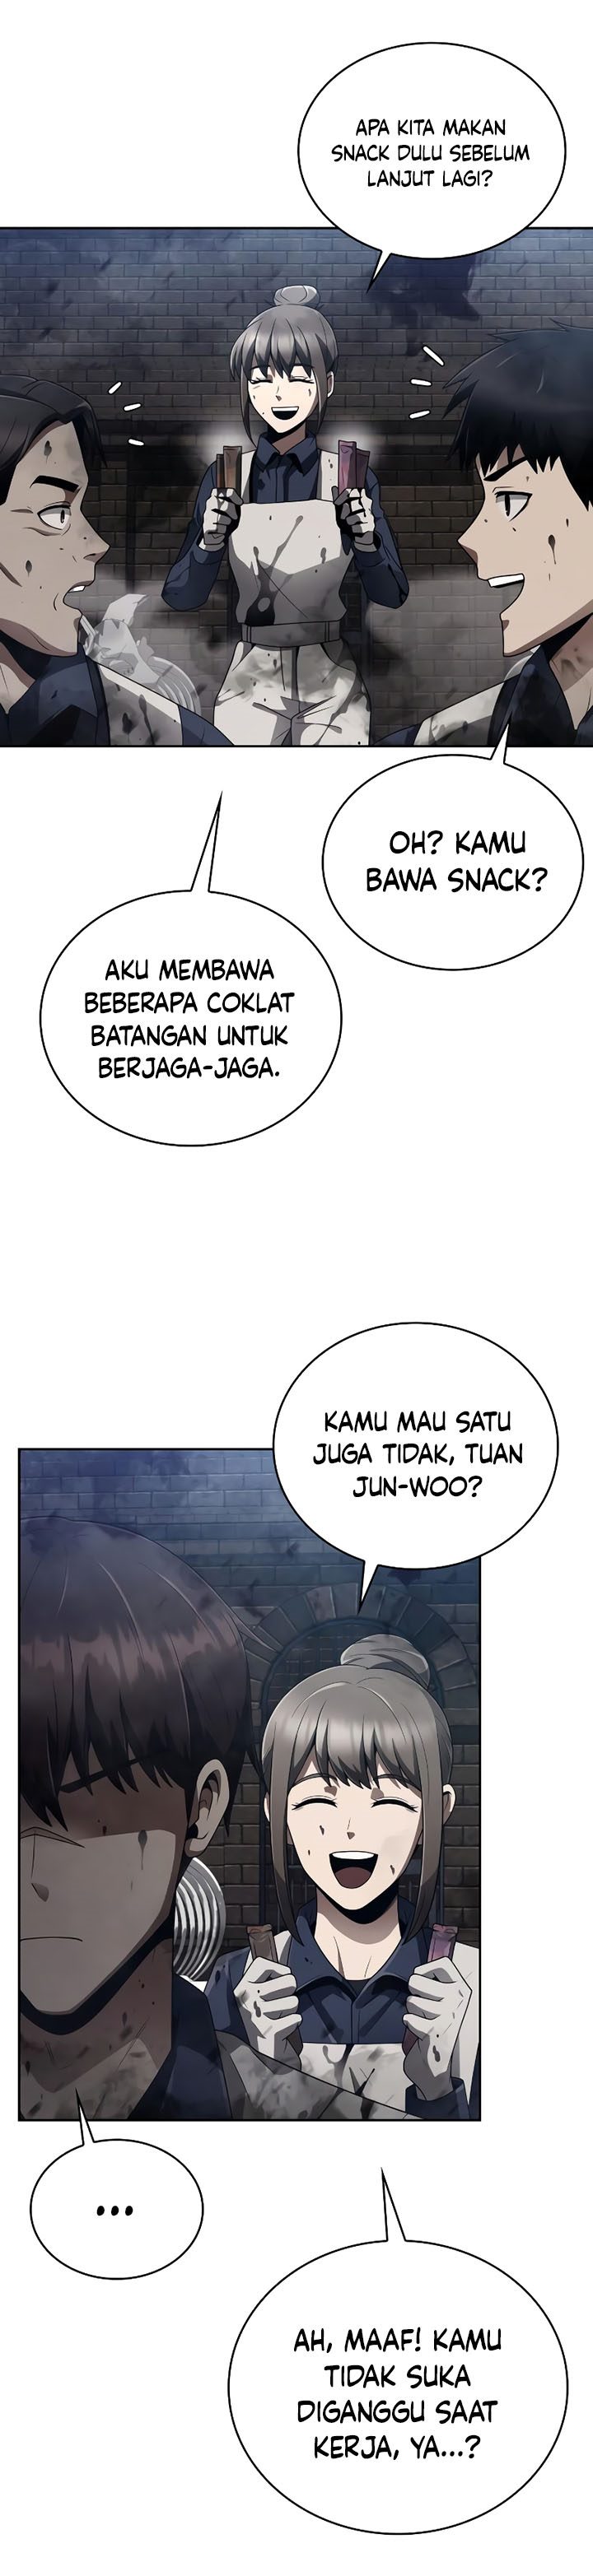 Dilarang COPAS - situs resmi www.mangacanblog.com - Komik clever cleaning life of the returned genius hunter 016 - chapter 16 17 Indonesia clever cleaning life of the returned genius hunter 016 - chapter 16 Terbaru 7|Baca Manga Komik Indonesia|Mangacan